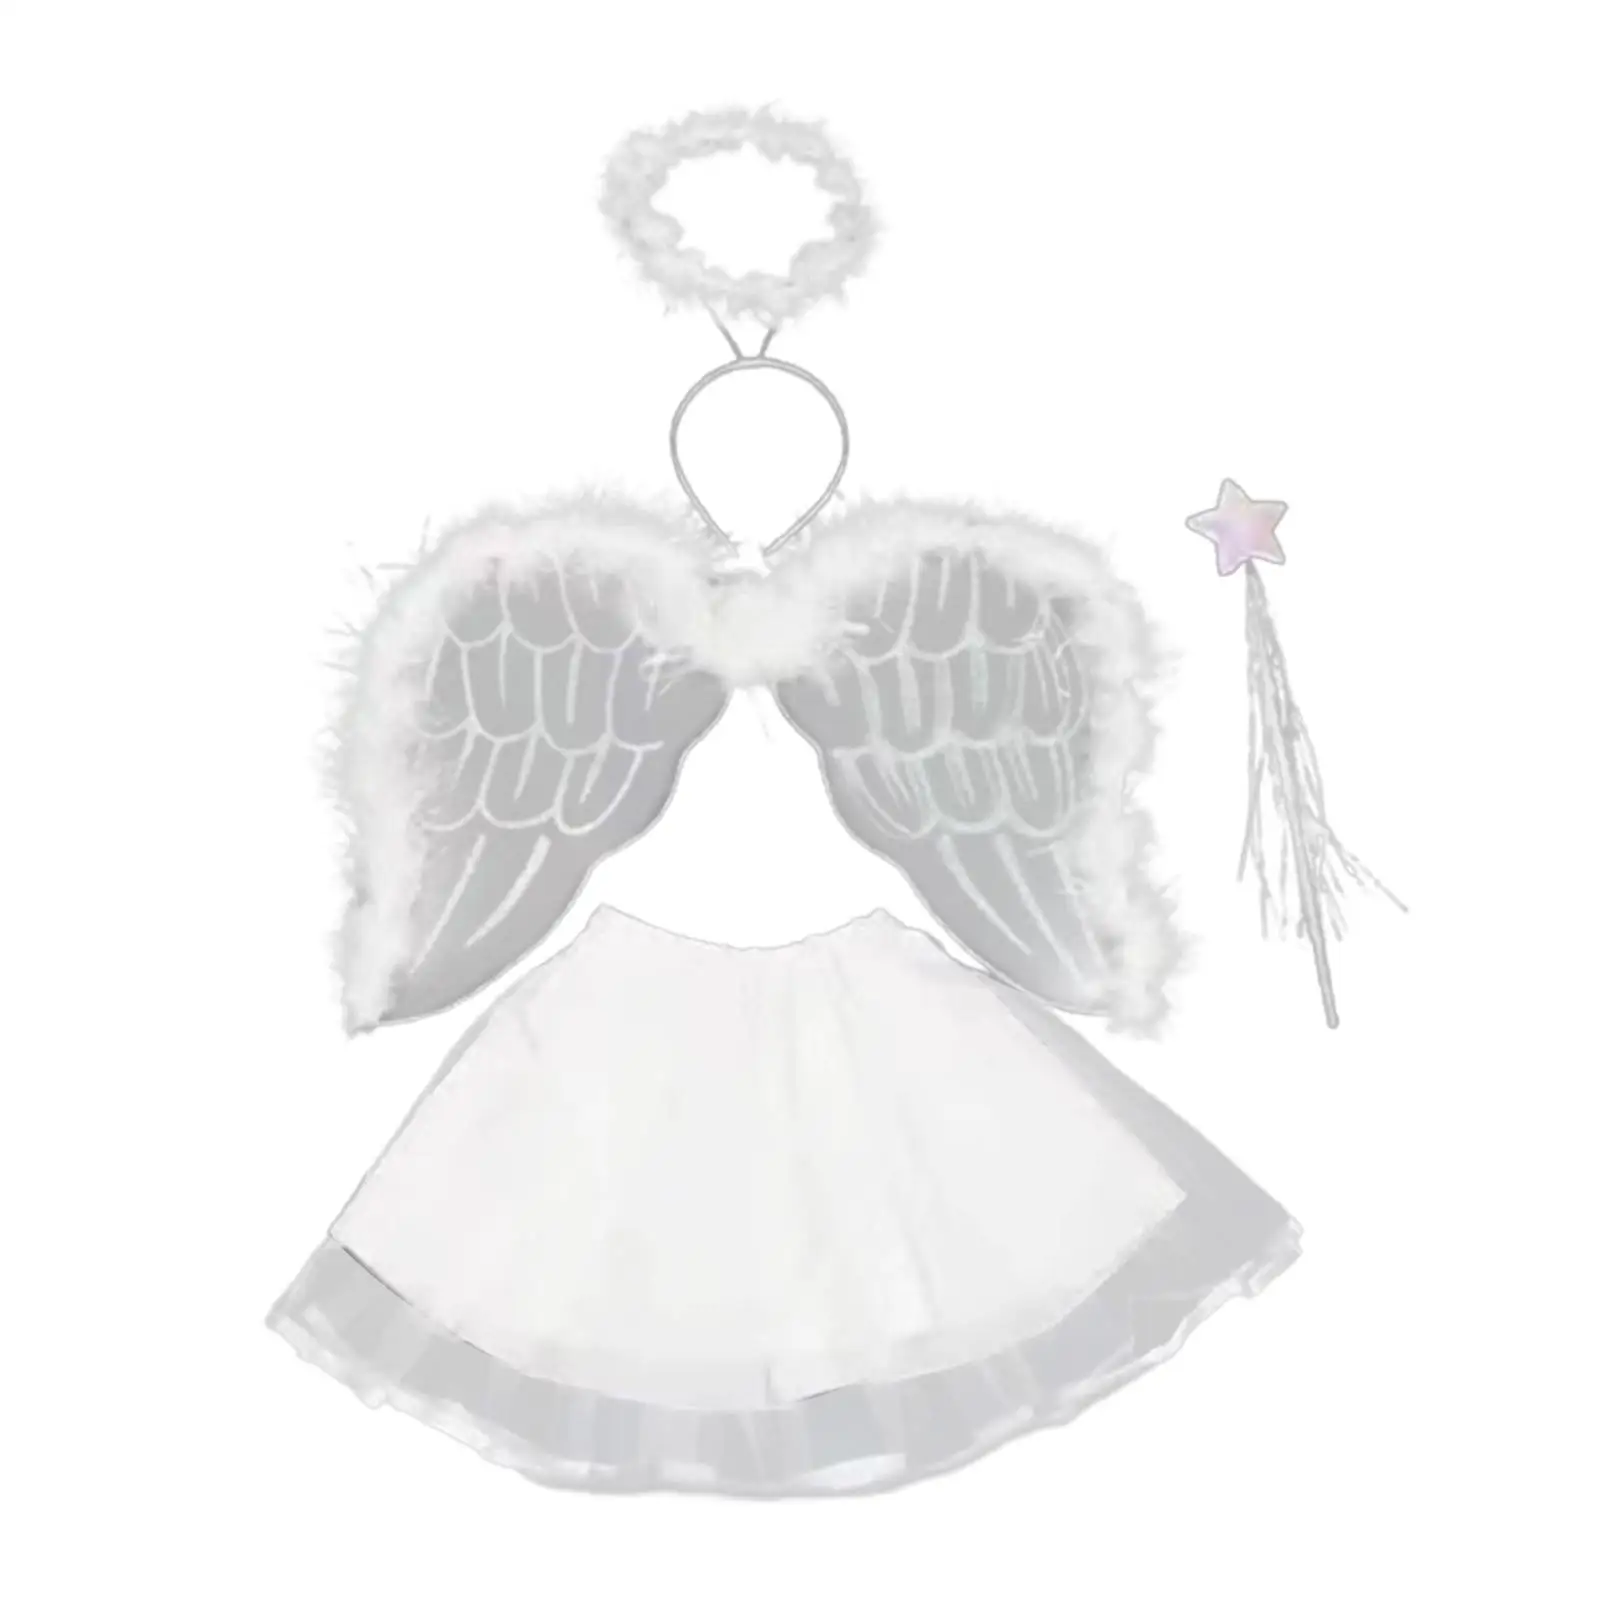 Angel Costume for Girls Lovely Kids Cosplay Tutu Skirt Angel Wing for Festival Masquerade Carnival Role Play Party Supplies